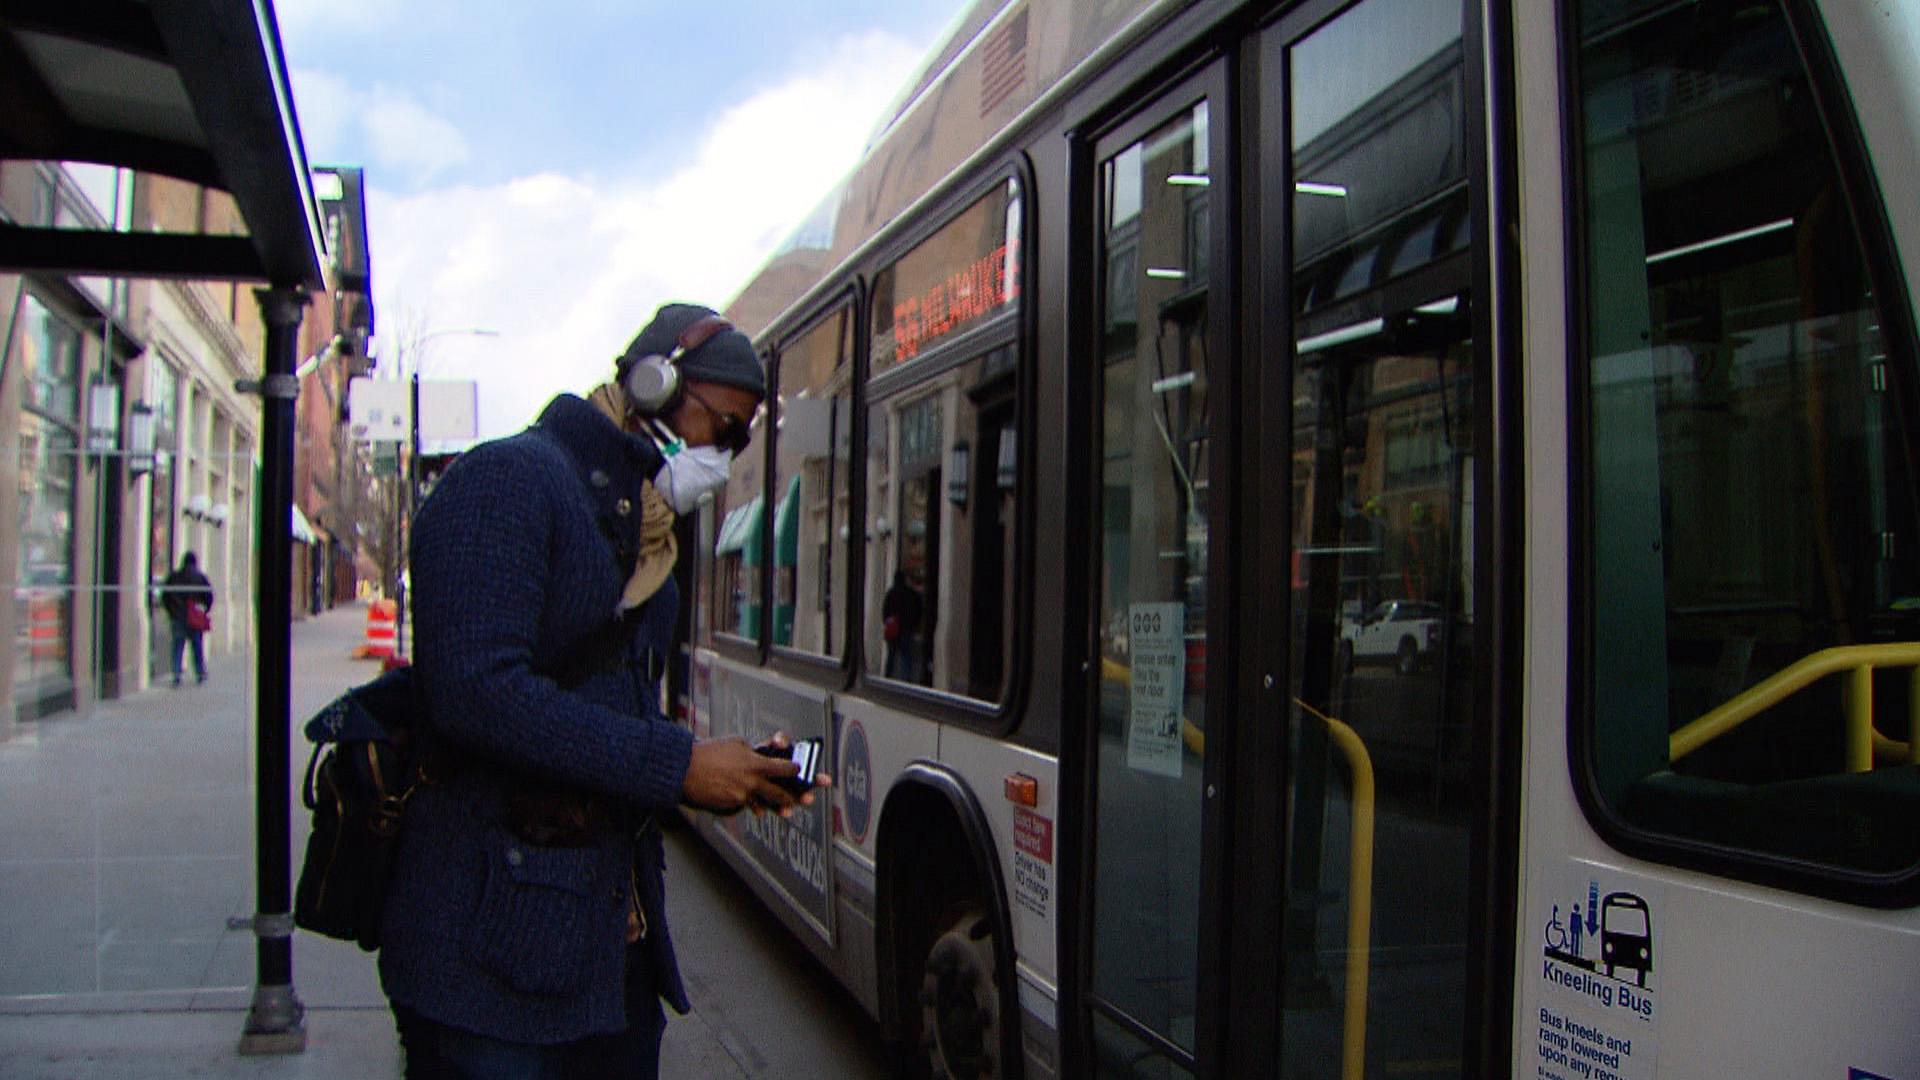 A passenger wearing a face mask boards a CTA bus in Chicago. (WTTW News)